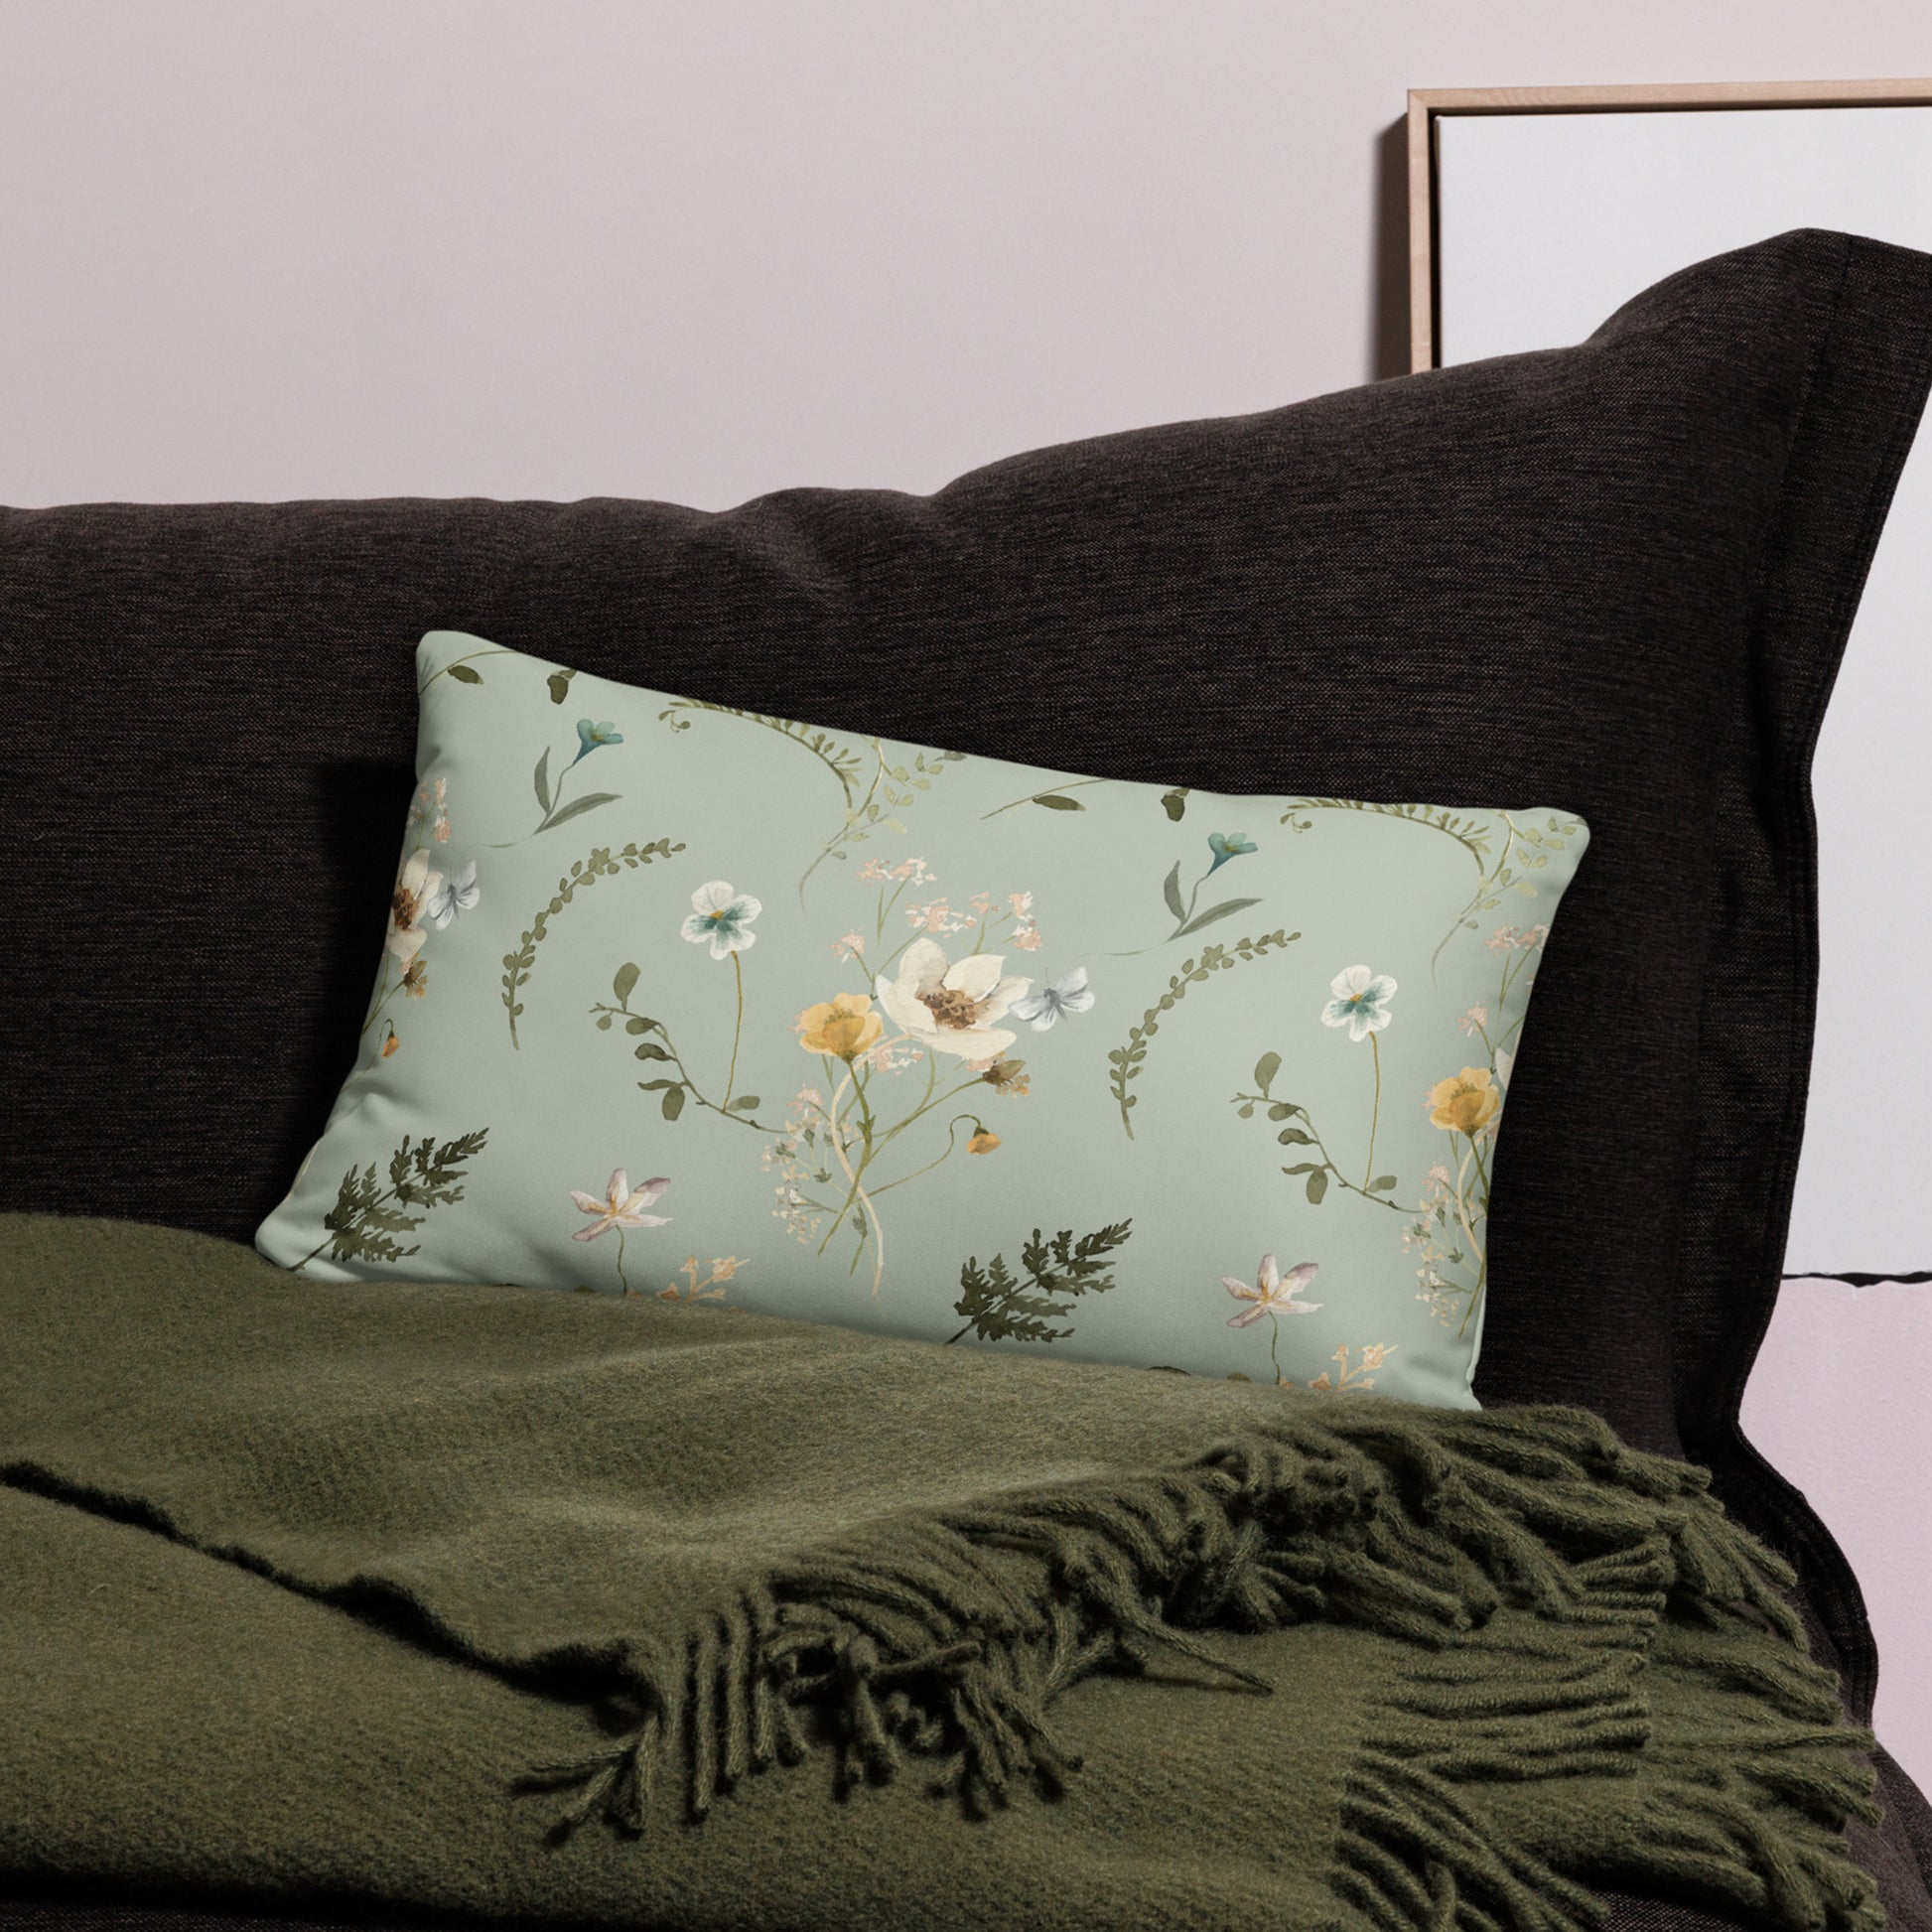 a pillow with flowers on it sitting on a couch